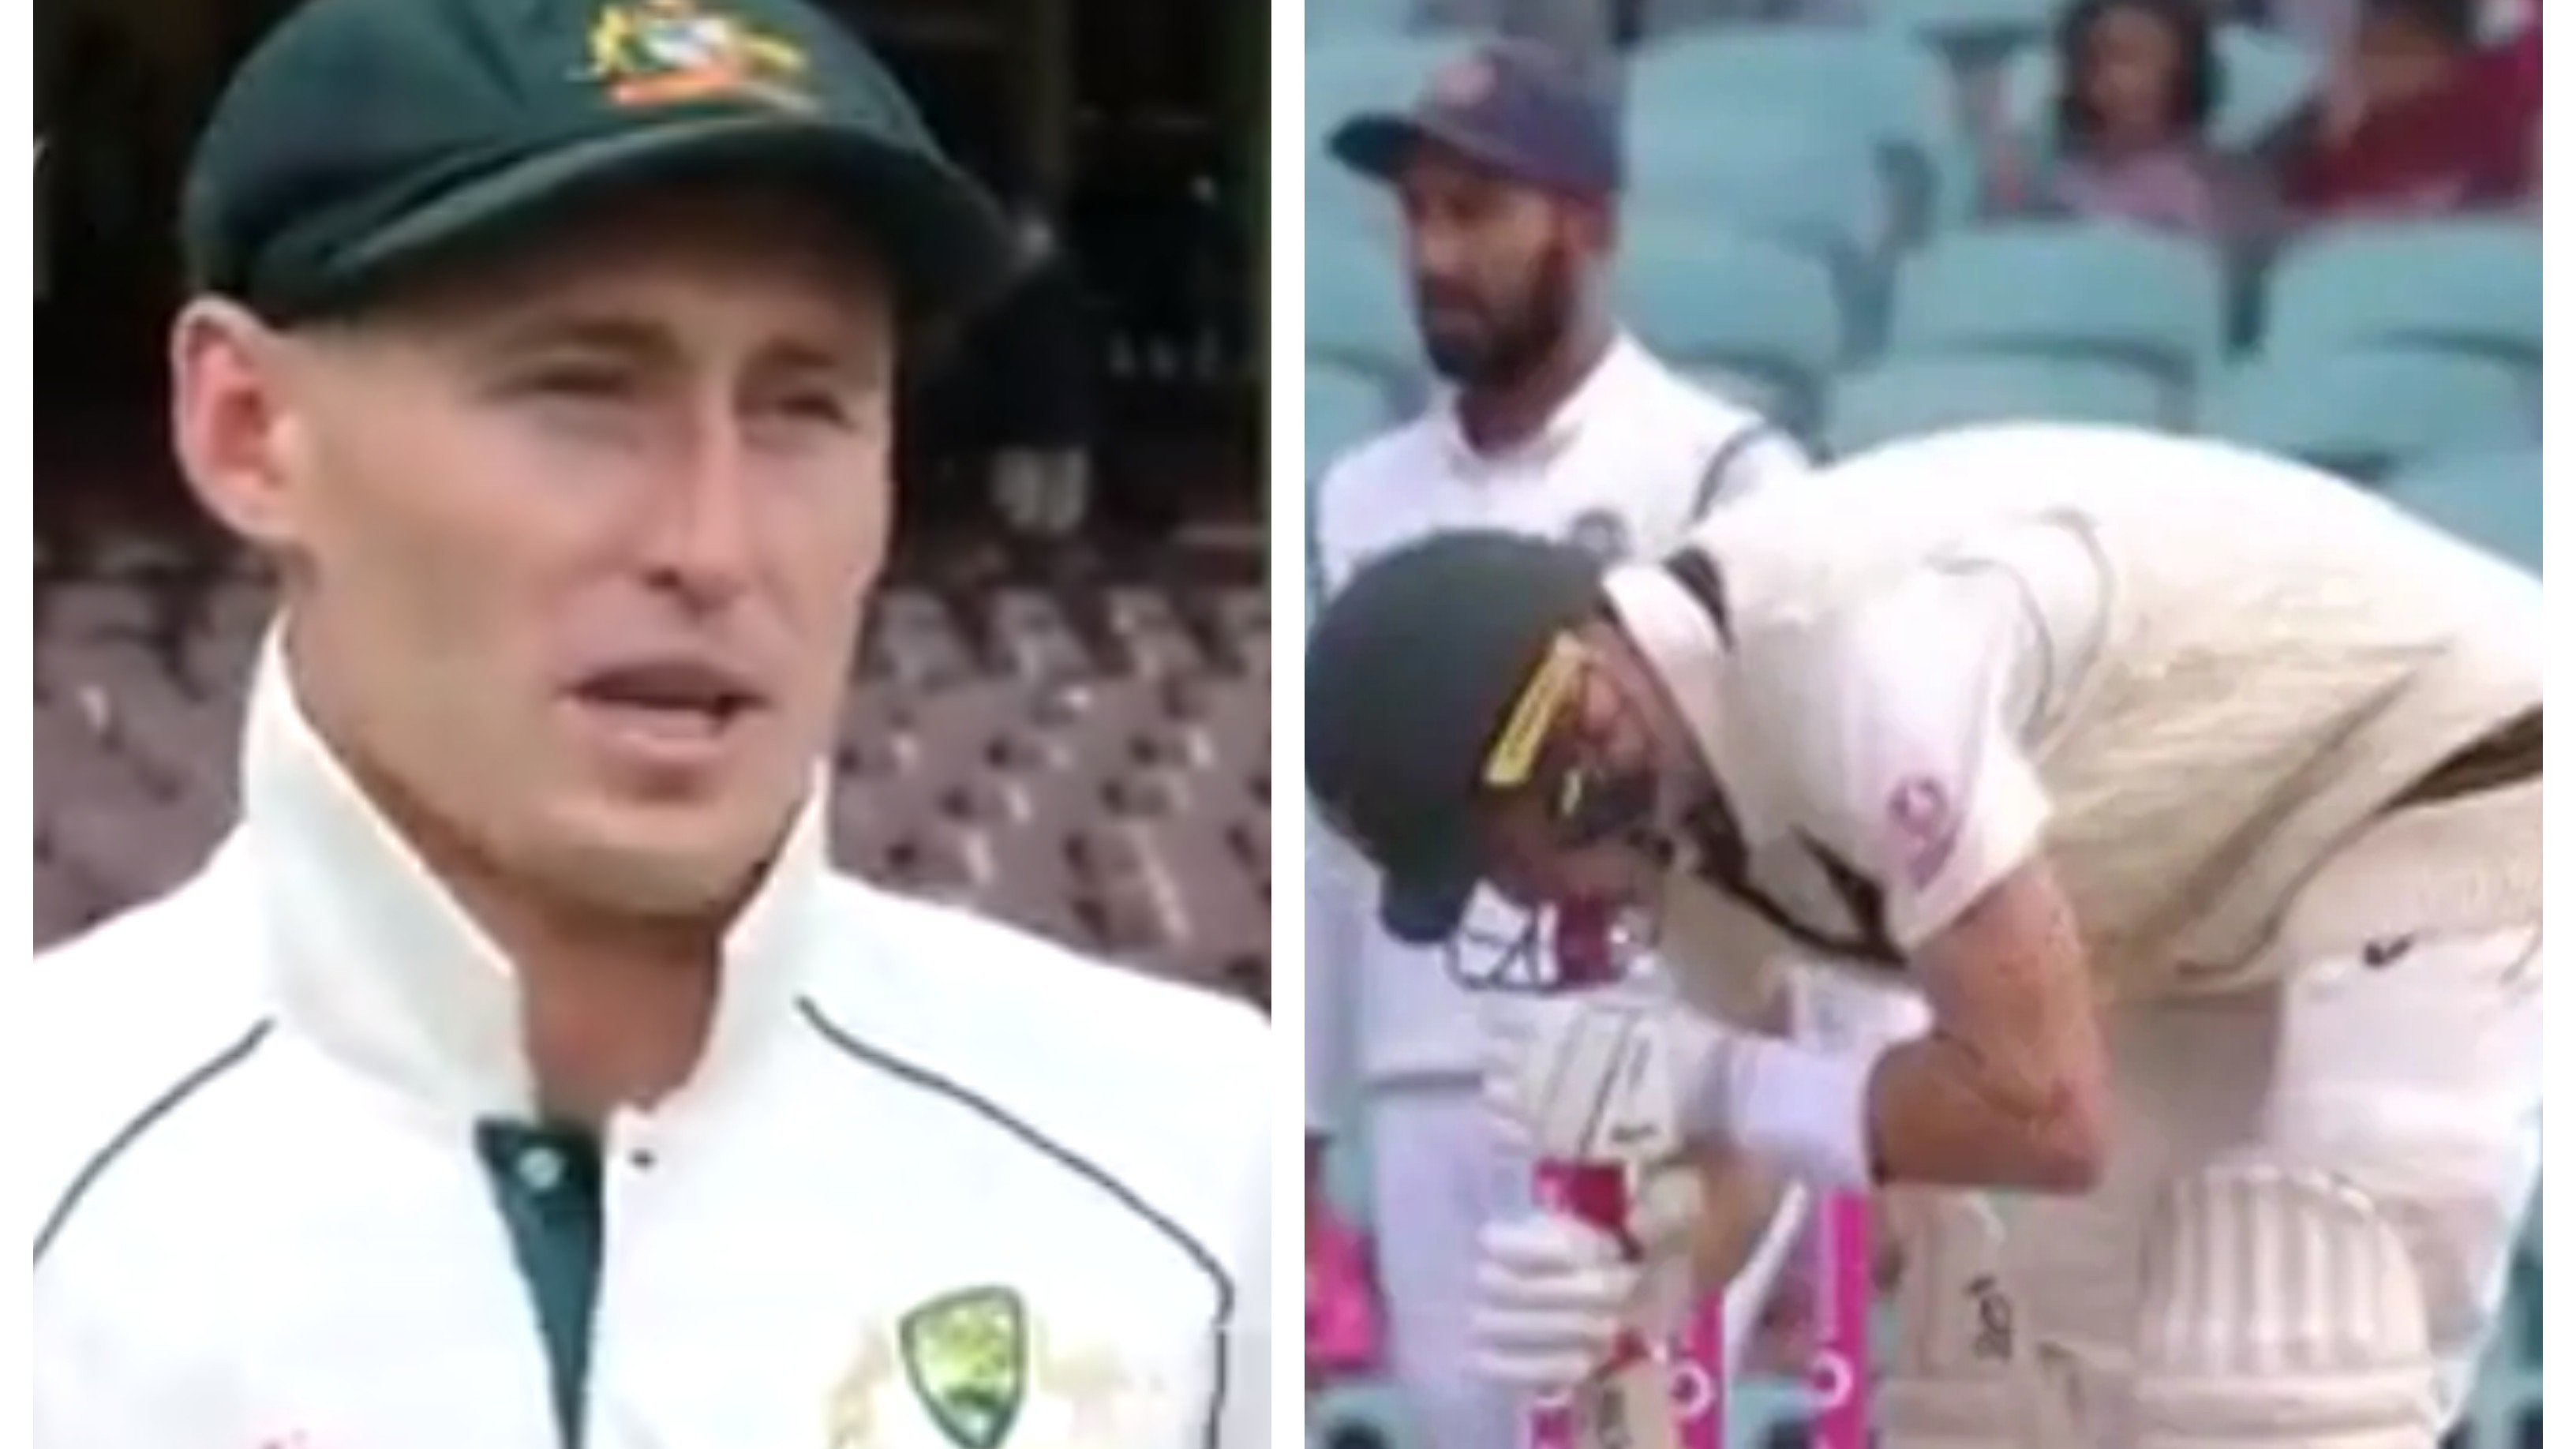 AUS v IND 2020-21: WATCH – Marnus Labuschagne narrates story behind the unusual method for changing his bat grip